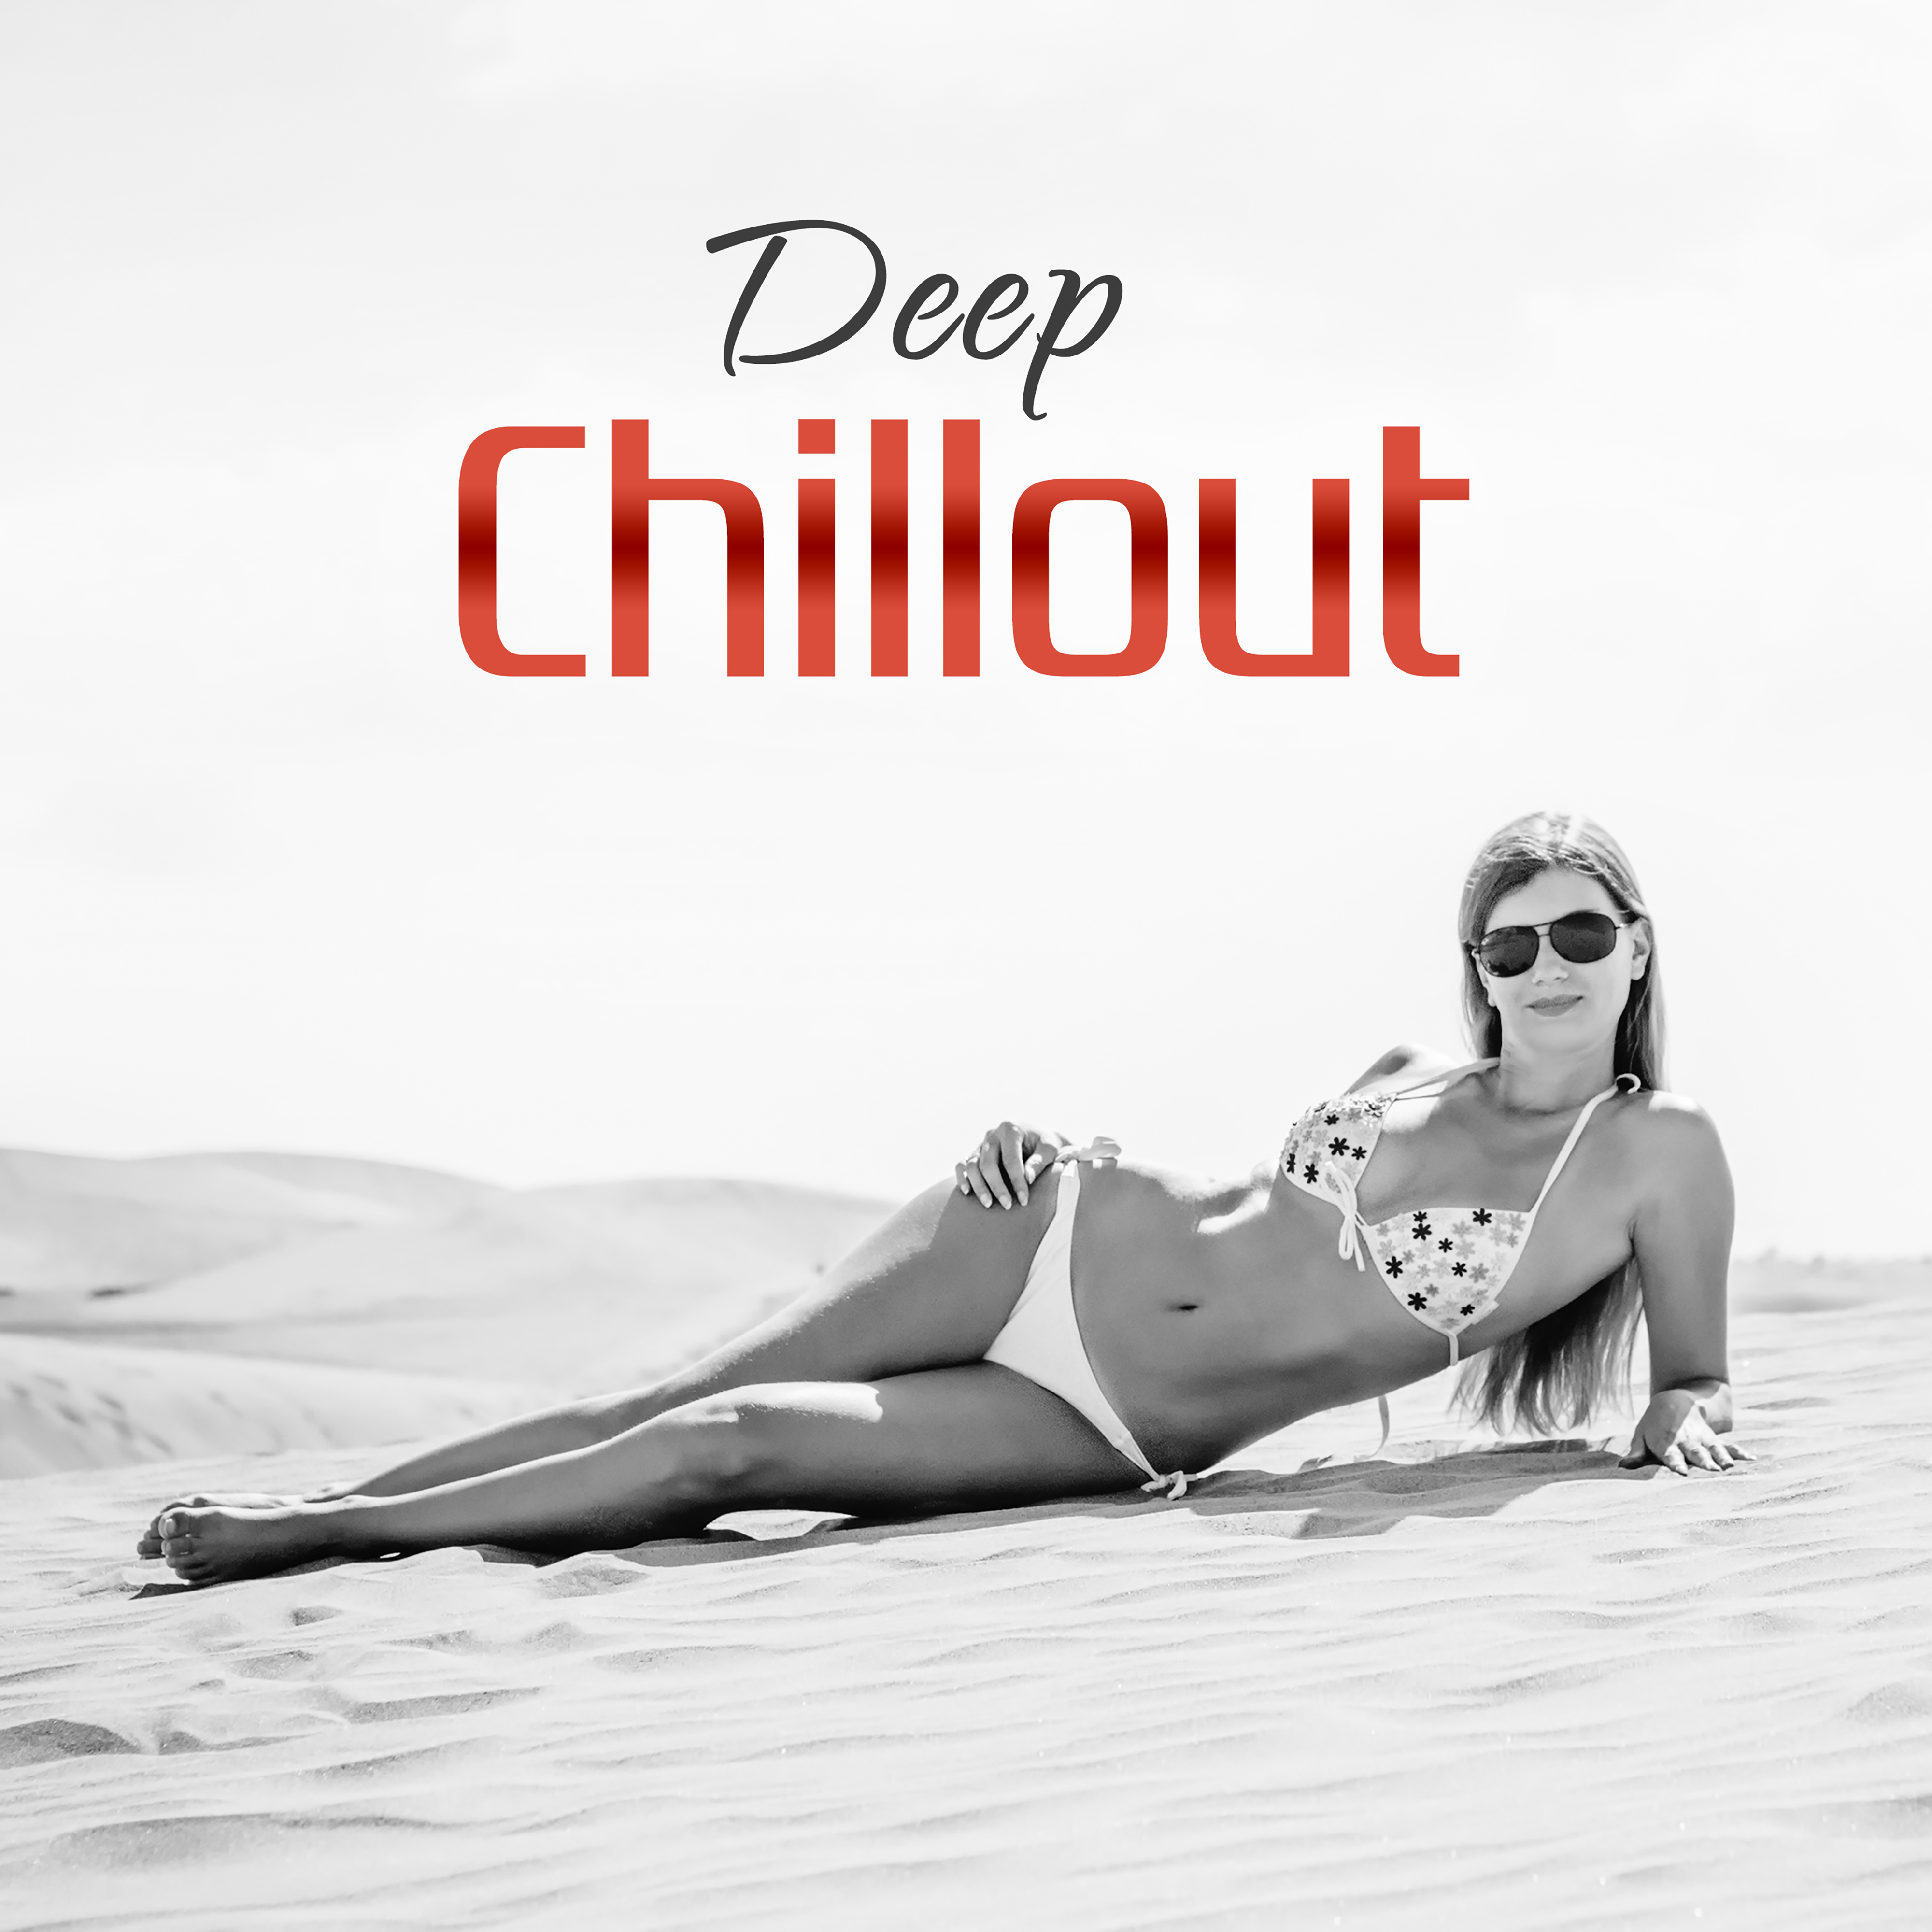 Deep Chillout – The Best of Chill Out Summer Sounds, Relaxing Music, Serenity Chillout, Ambient Chillout  Lounge